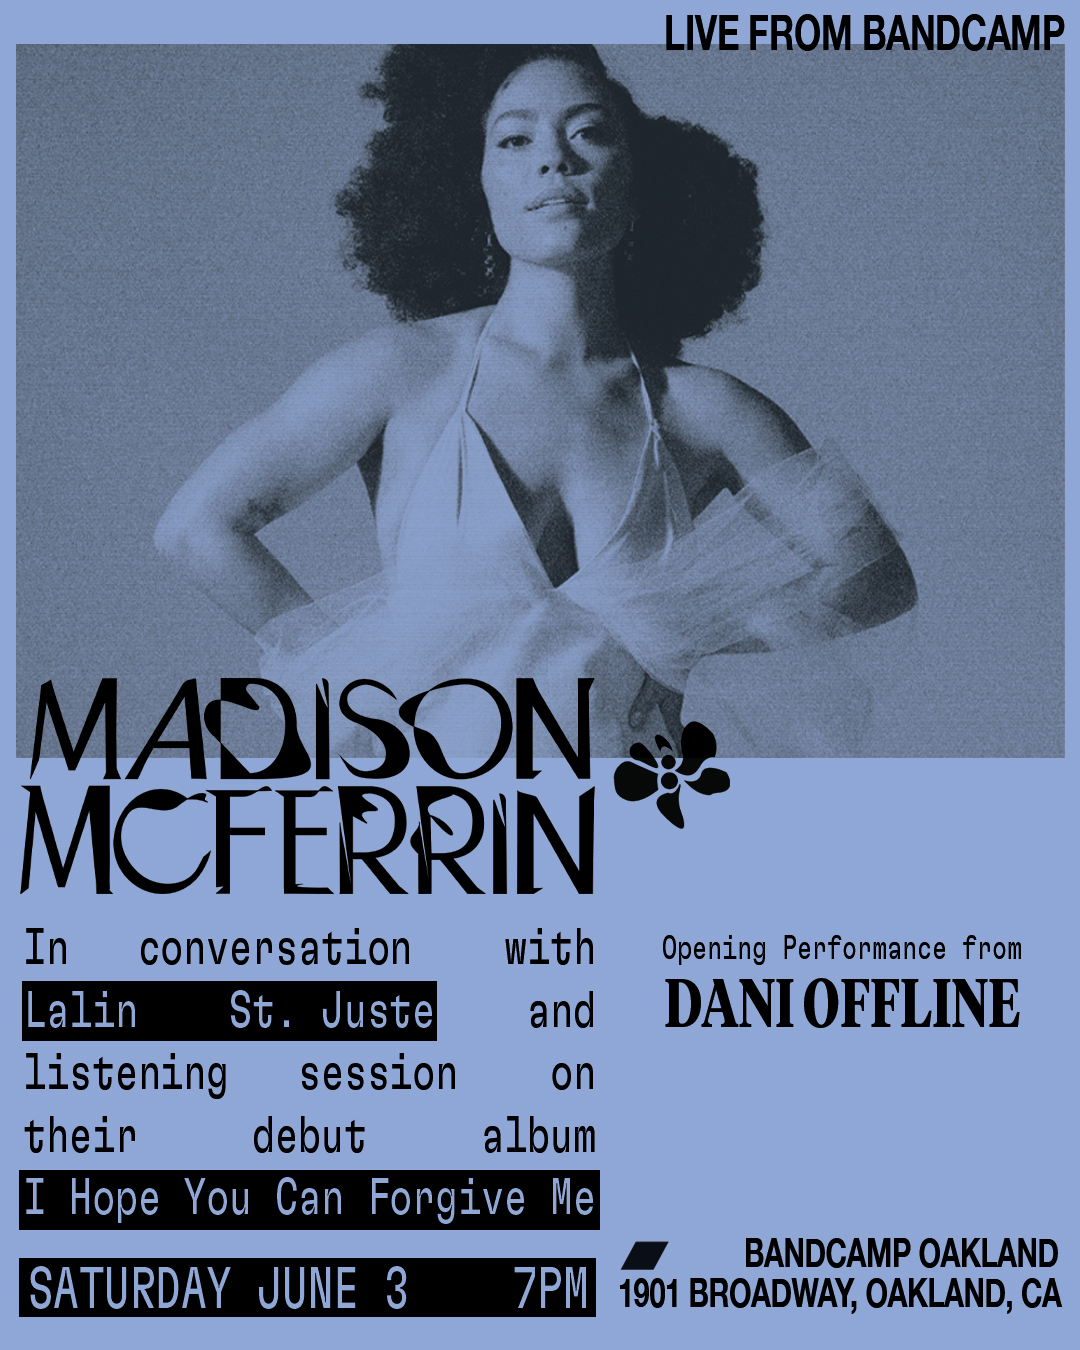 Madison McFerrin at Bandcamp, Opening set by Dani Offline